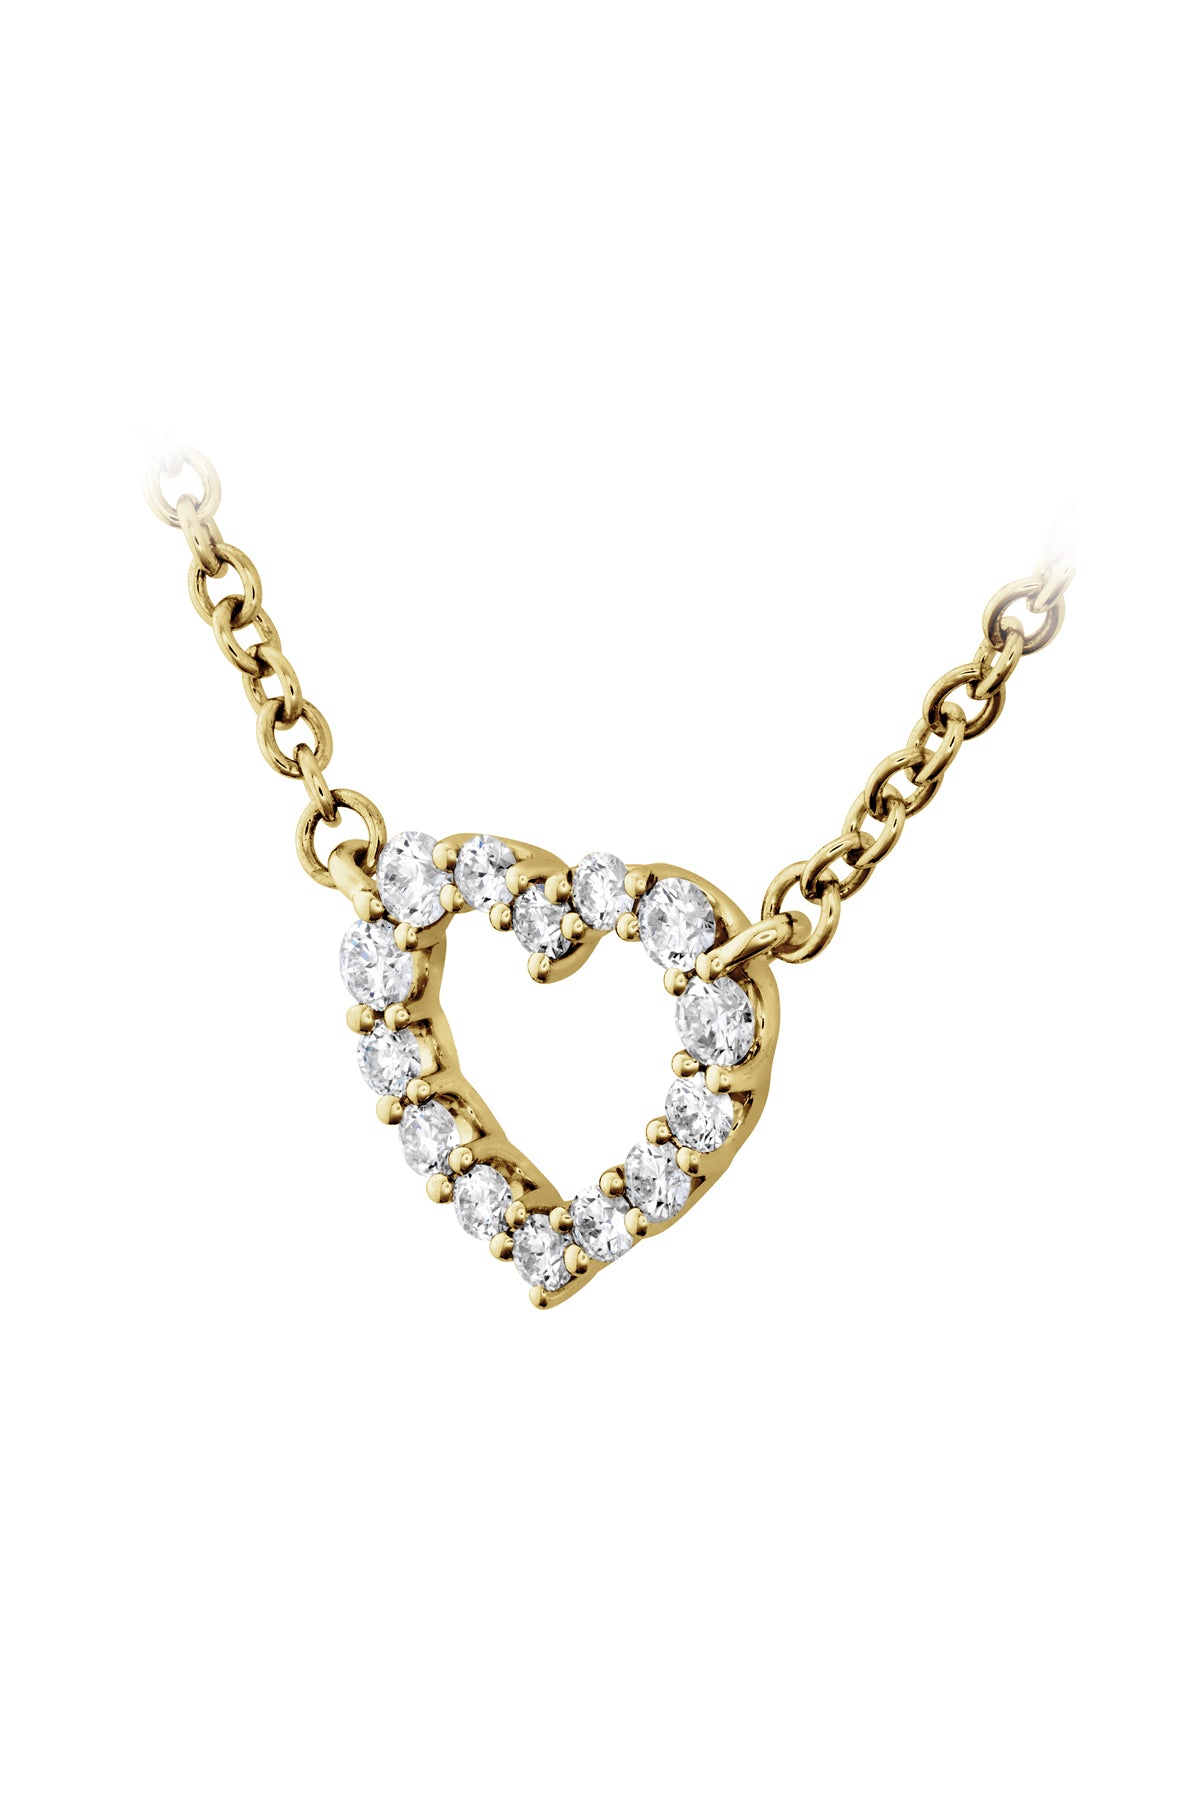 Small Signature Heart Pendant From Hearts On Fire available at LeGassick Diamonds and Jewellery Gold Coast, Australia.